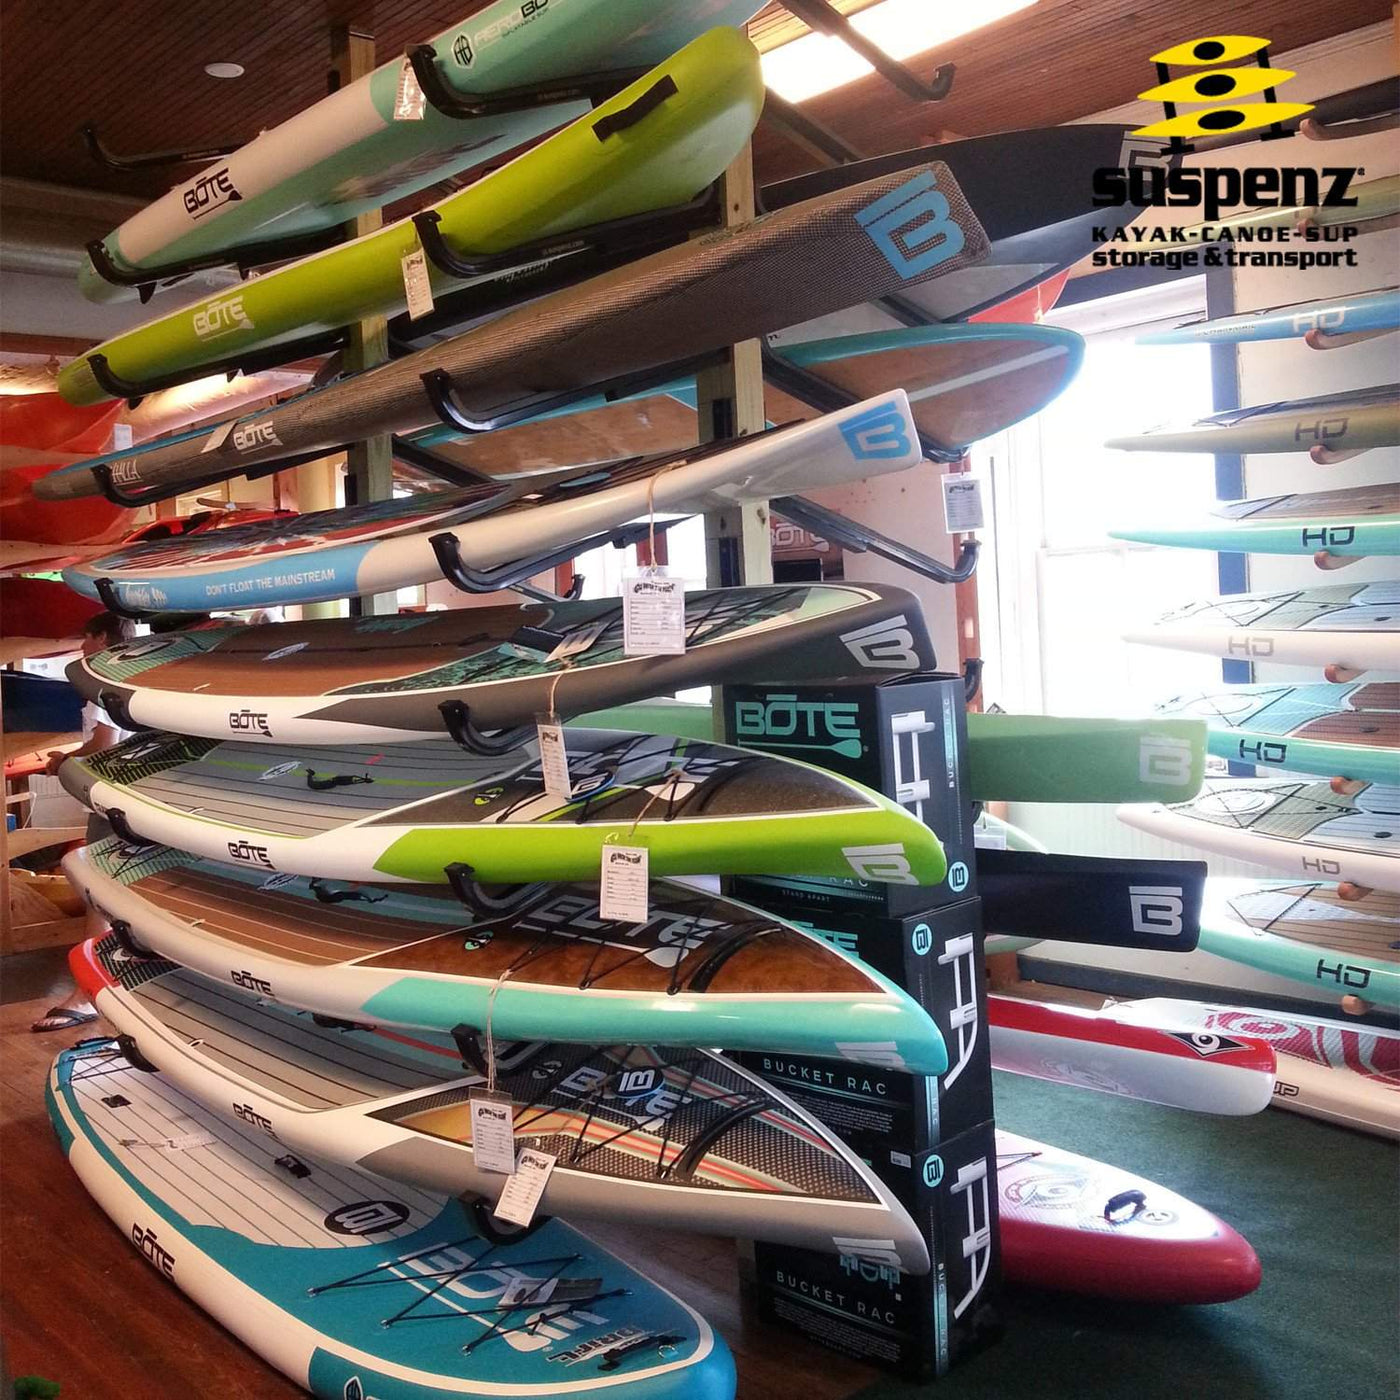 A store displaying their SUP boards on the display flat rack